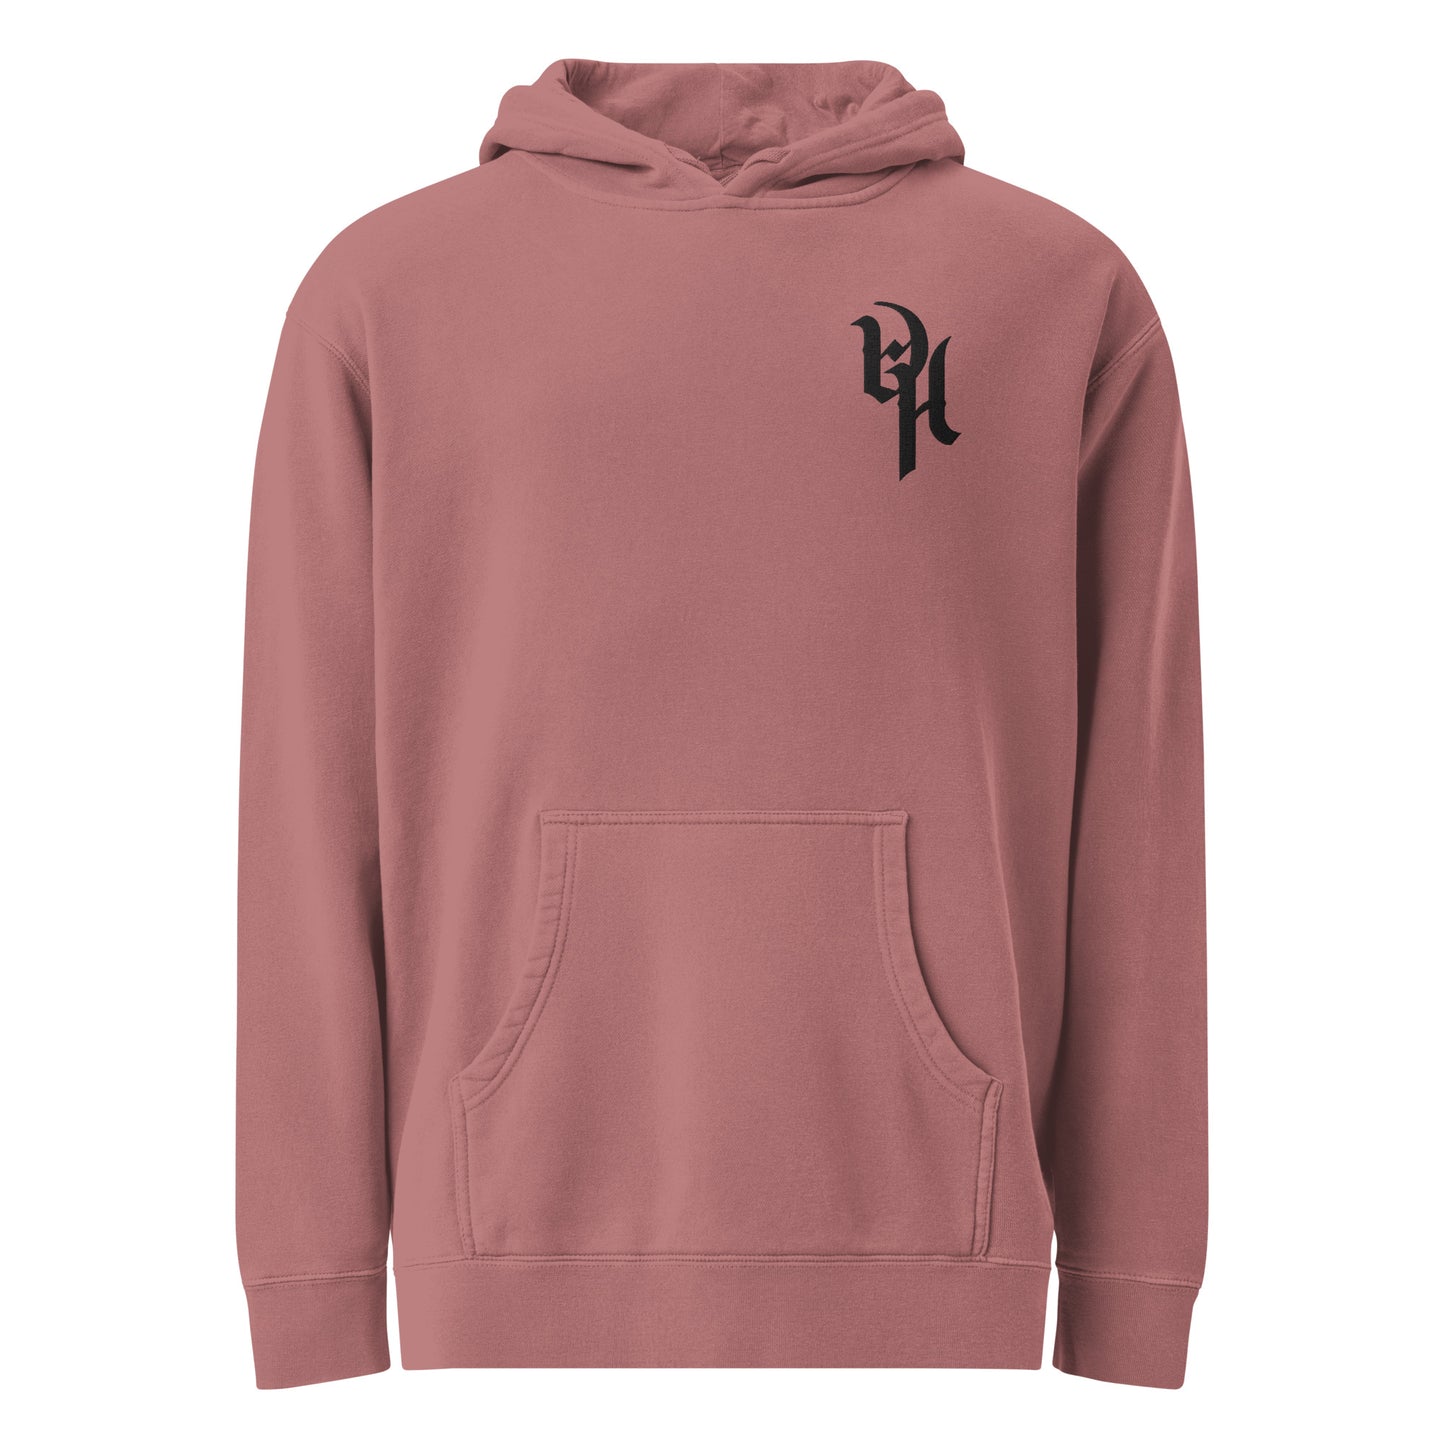 DH Pigment-Dyed hoodie